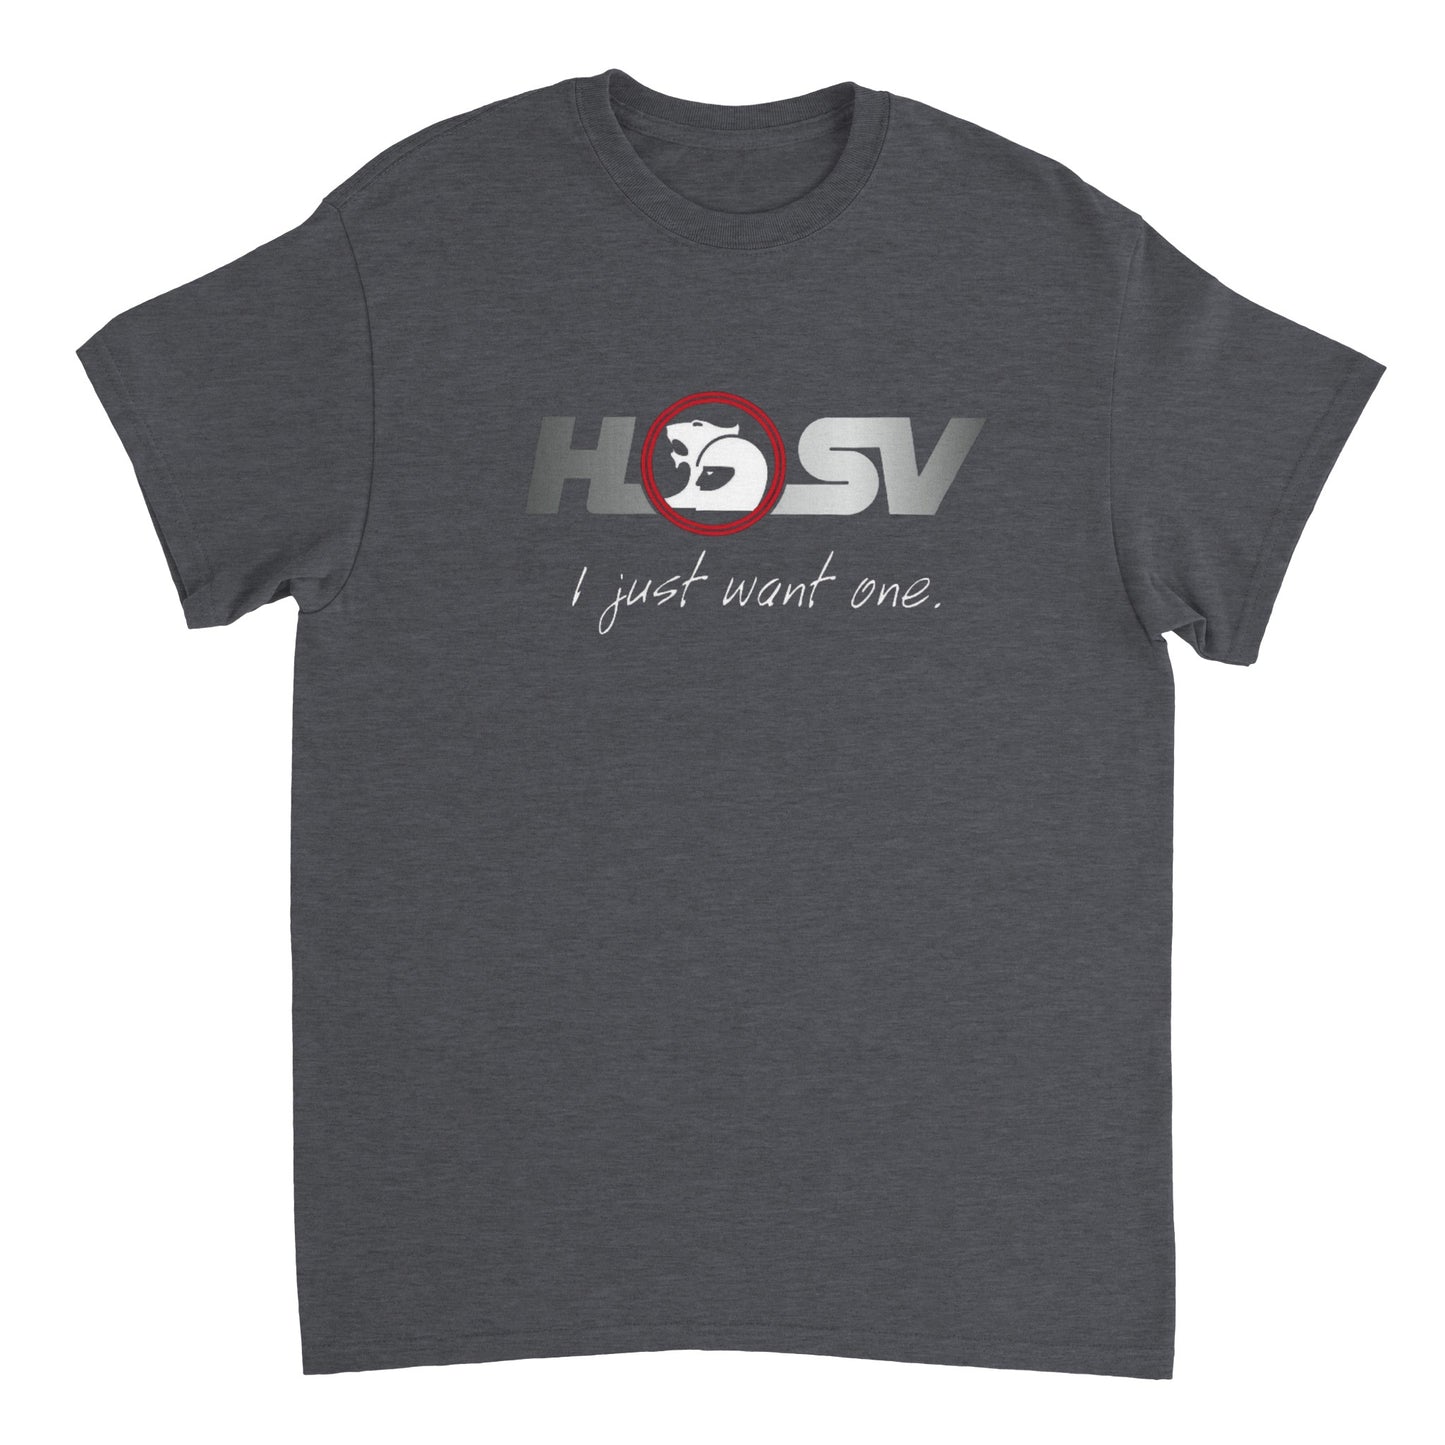 HSV 'I just want one' Tee